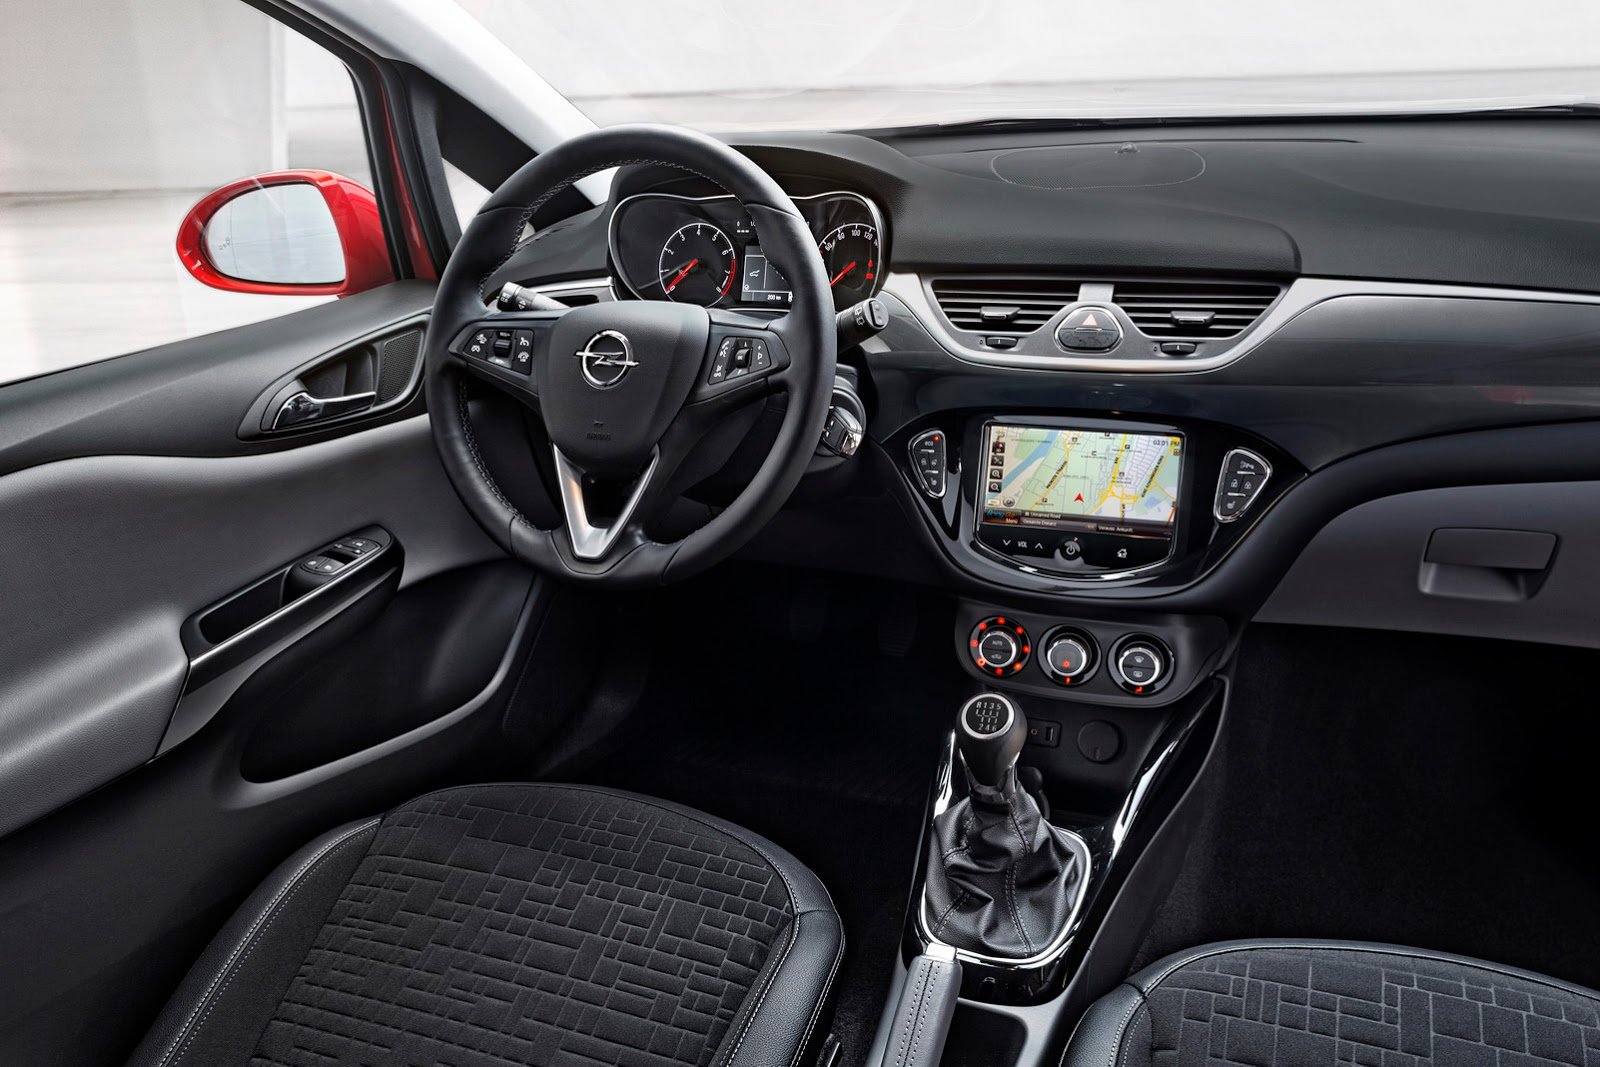 2014, Opel, Corsa, Red, Germany, Cars, Interior Wallpaper